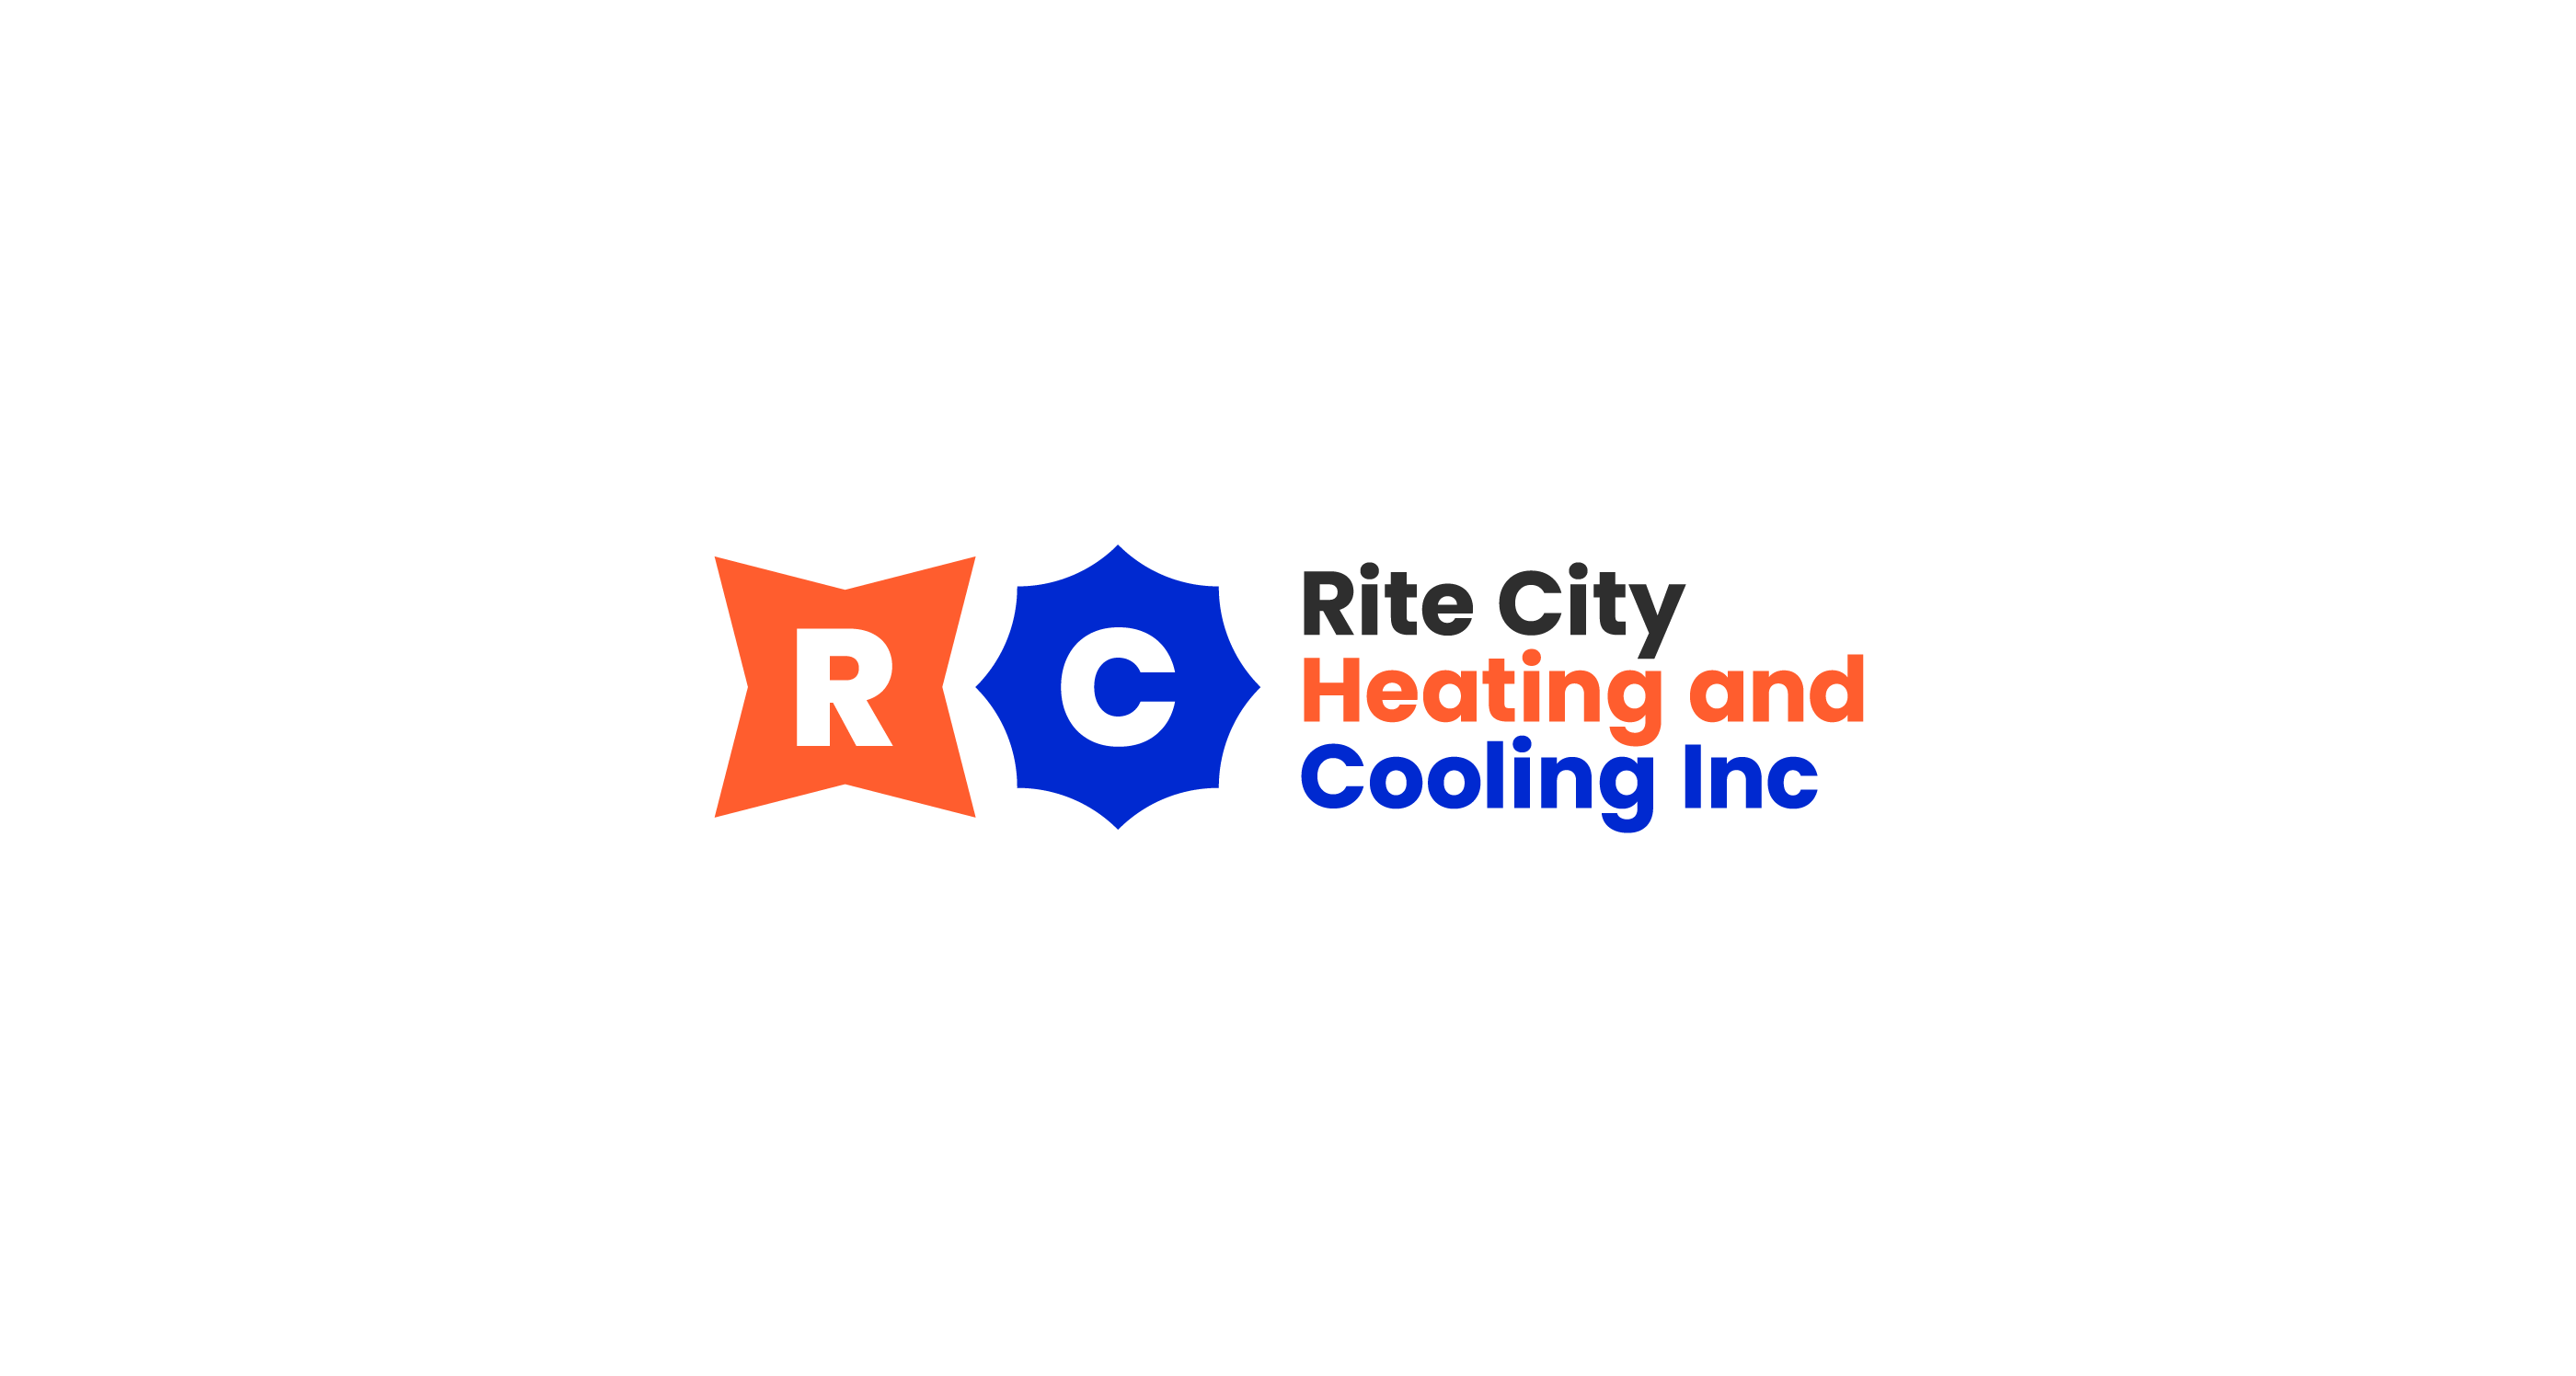 Rite City Heating and Cooling HVAC logo design.